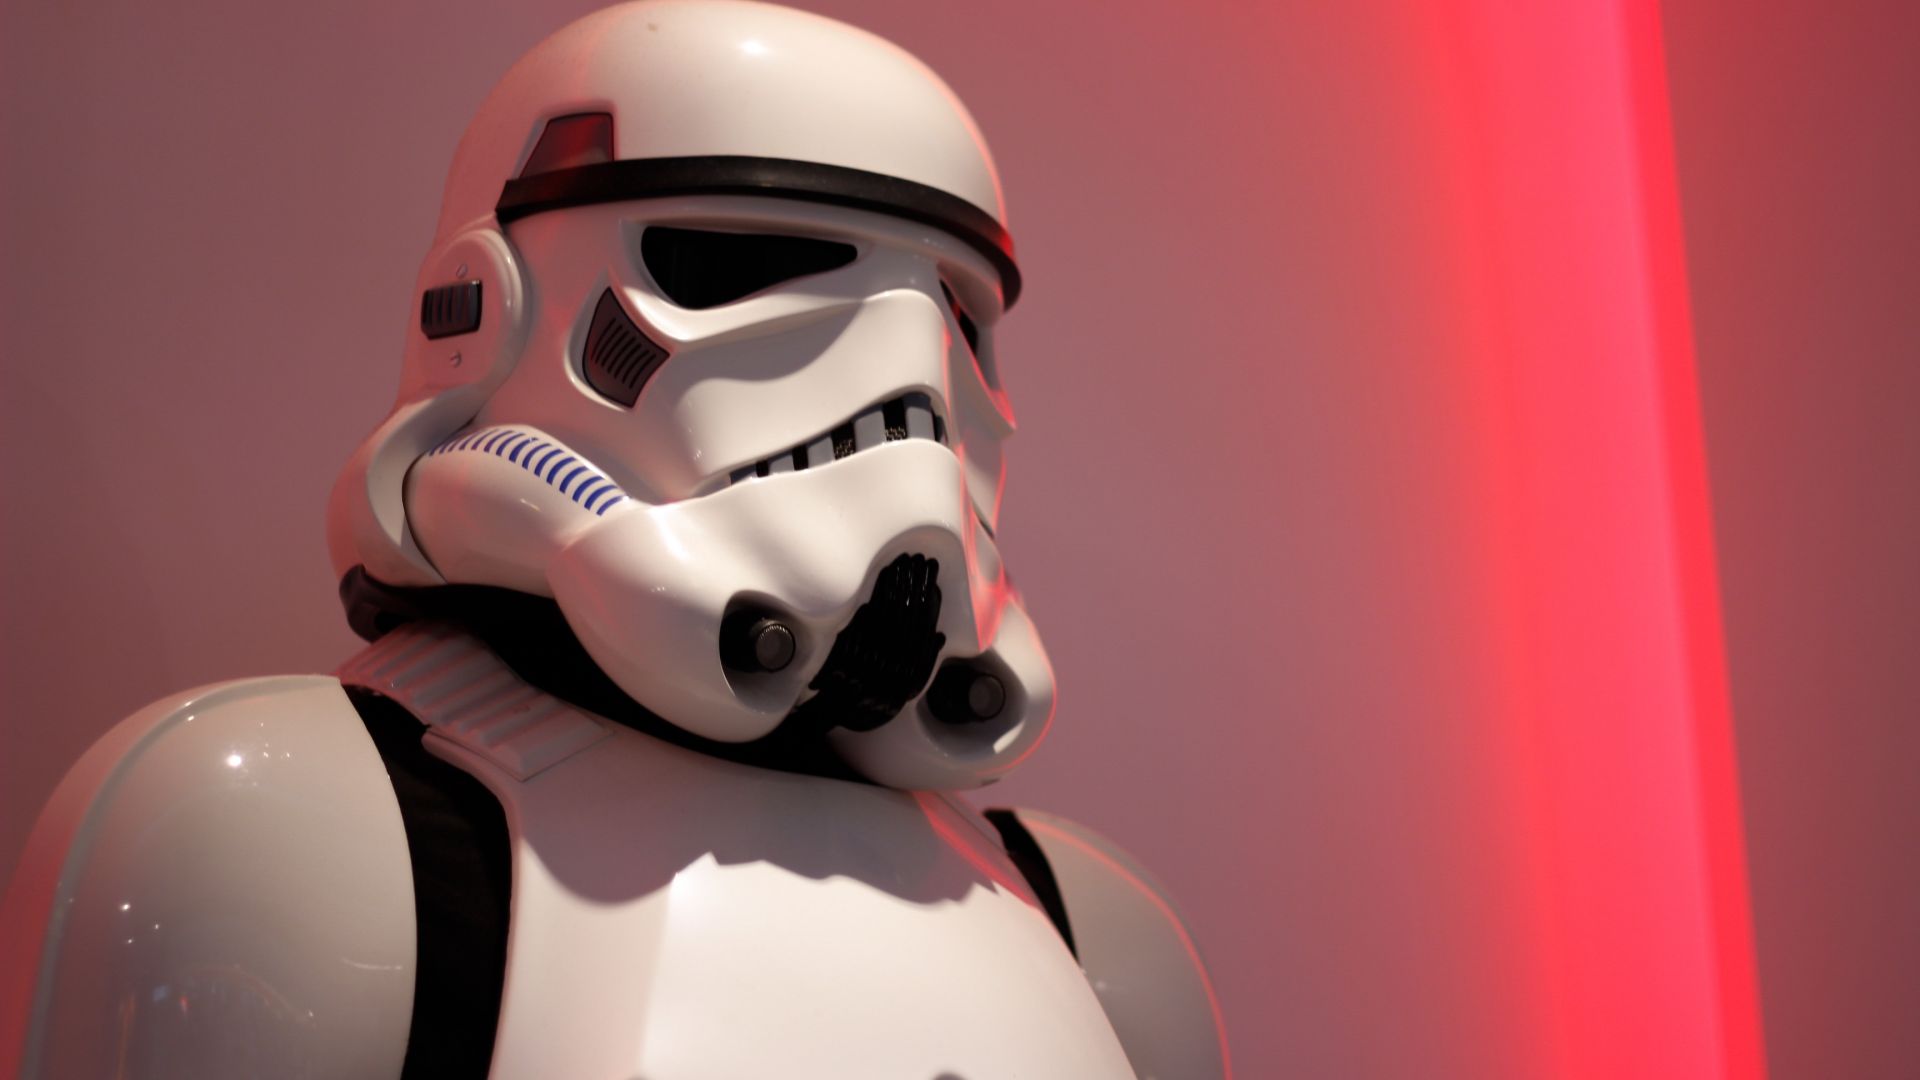 Wallpaper Stormtroopers, star wars, Lego toys